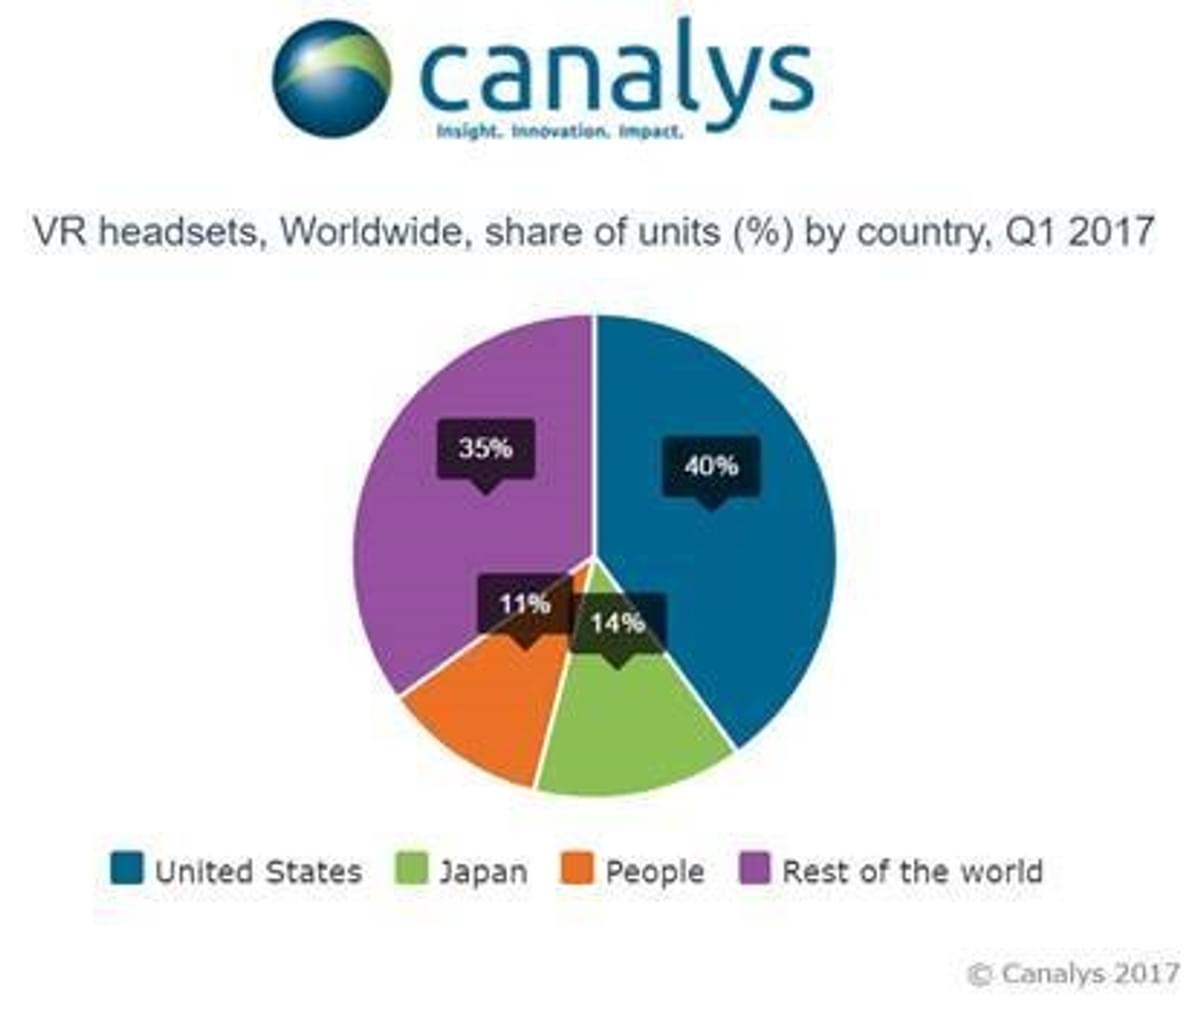 The US stays top for VR, while Japan unseats China to take second place in Q1 image